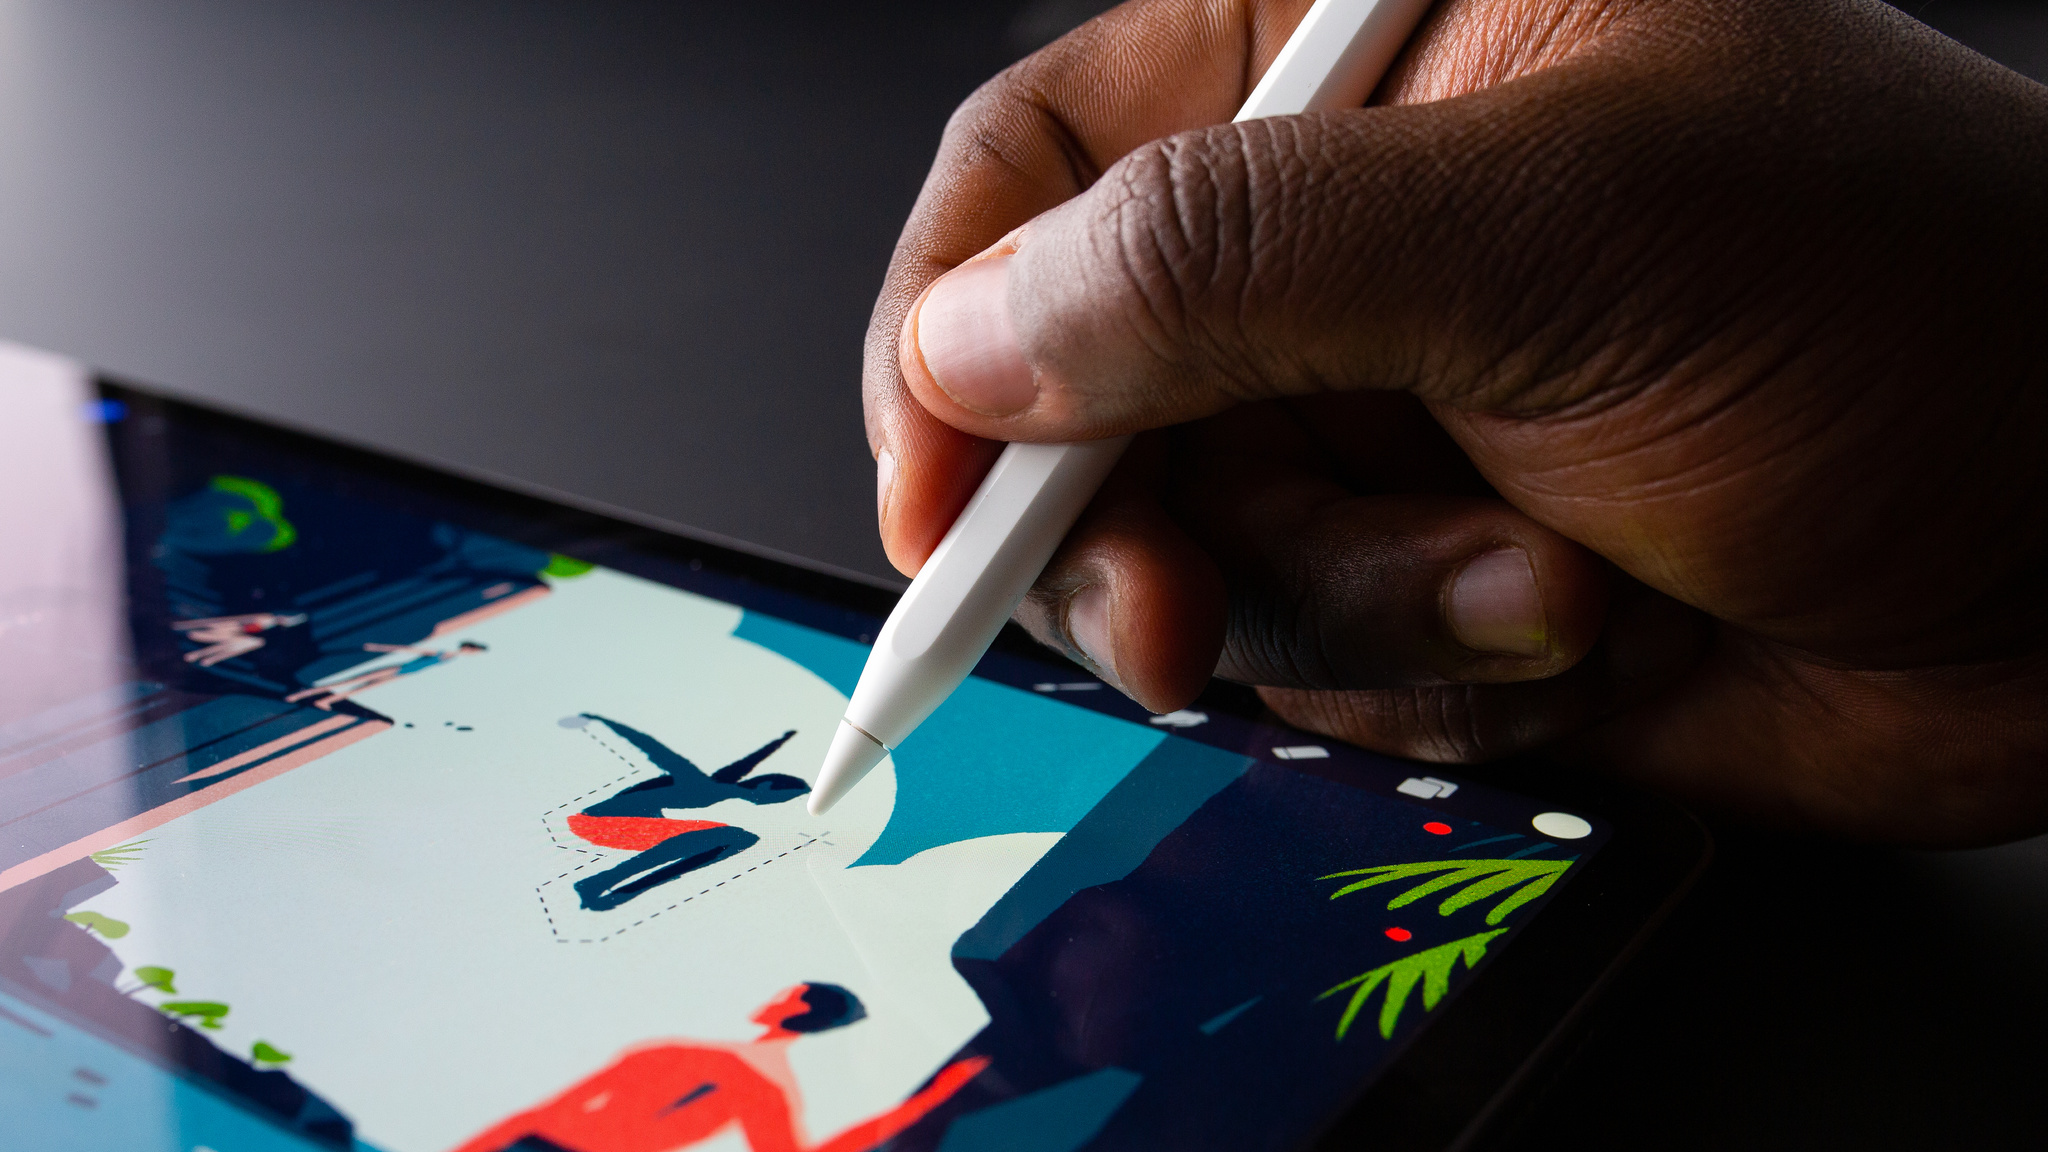 iPadOS 17.5 Beta Potentially References New Apple Pencil and 'Squeeze' Gesture